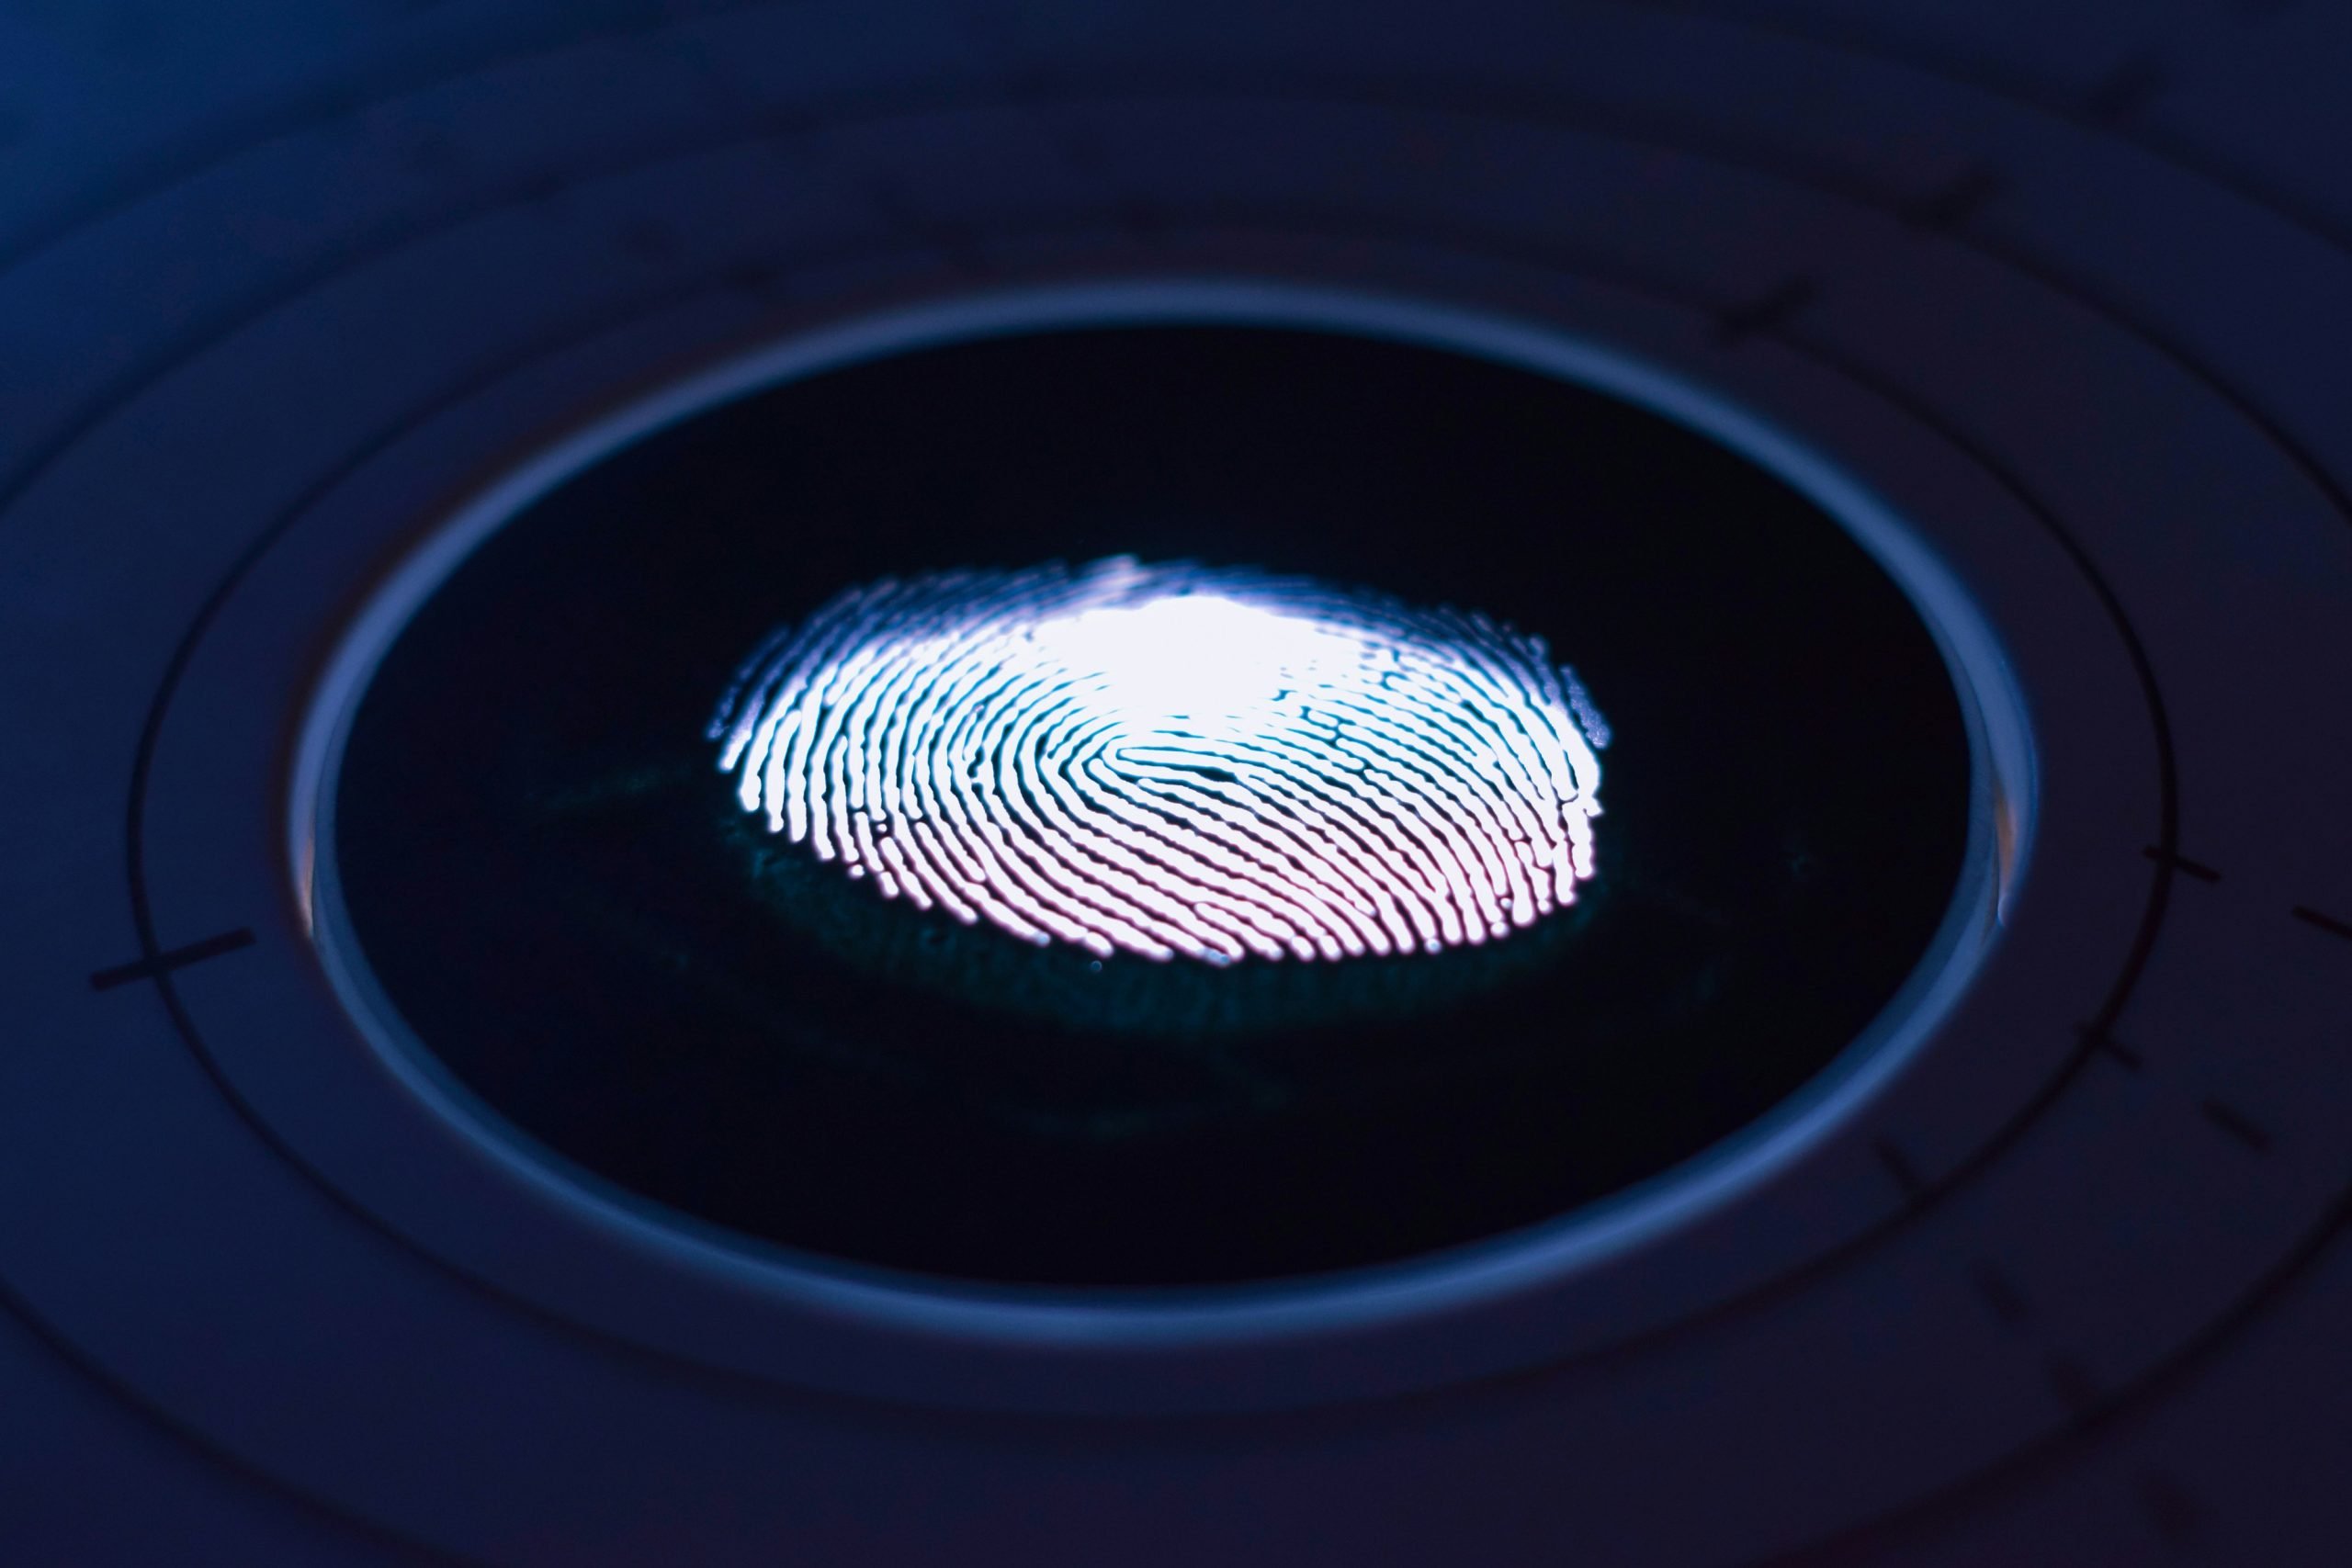 Huawei’s New Patent for an Ultrasonic Fingerprint Sensor has Surfaced On the web